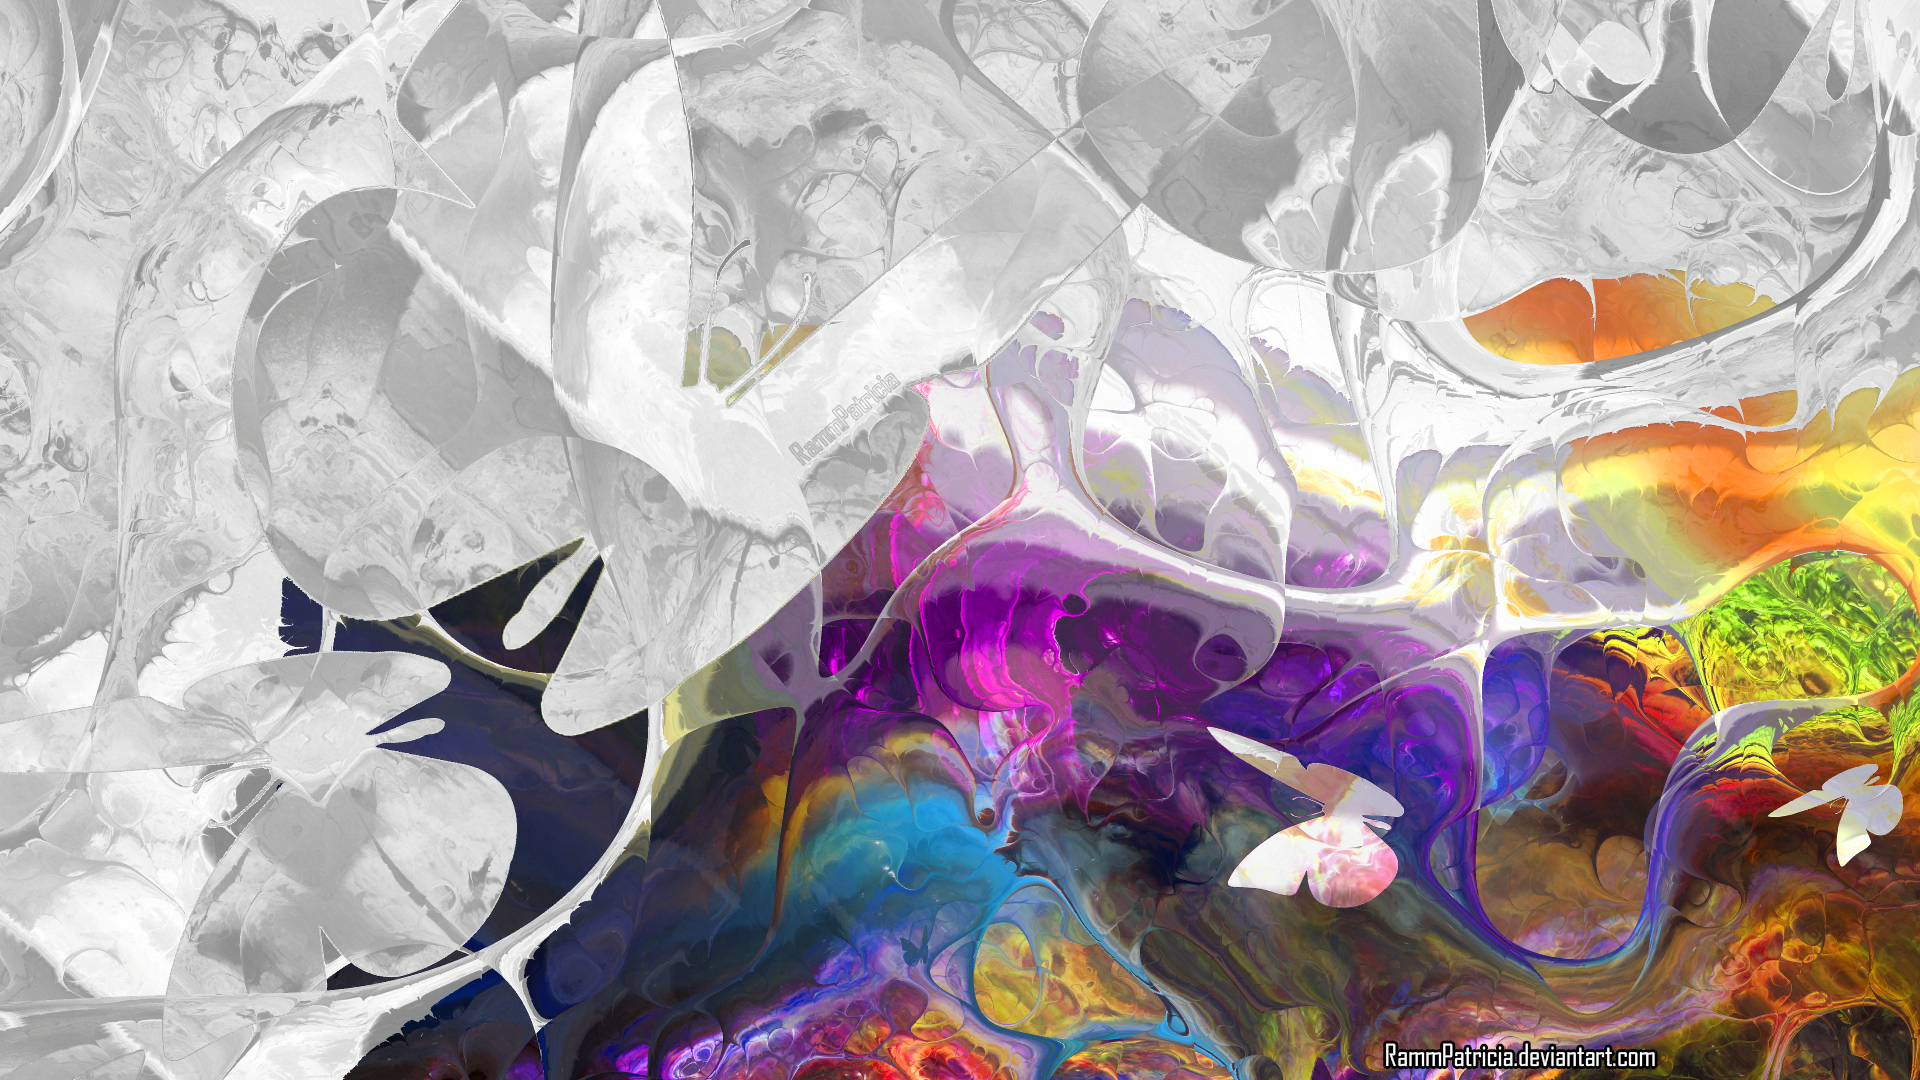 General 1920x1080 RammPatricia abstract digital art colorful butterfly watermarked